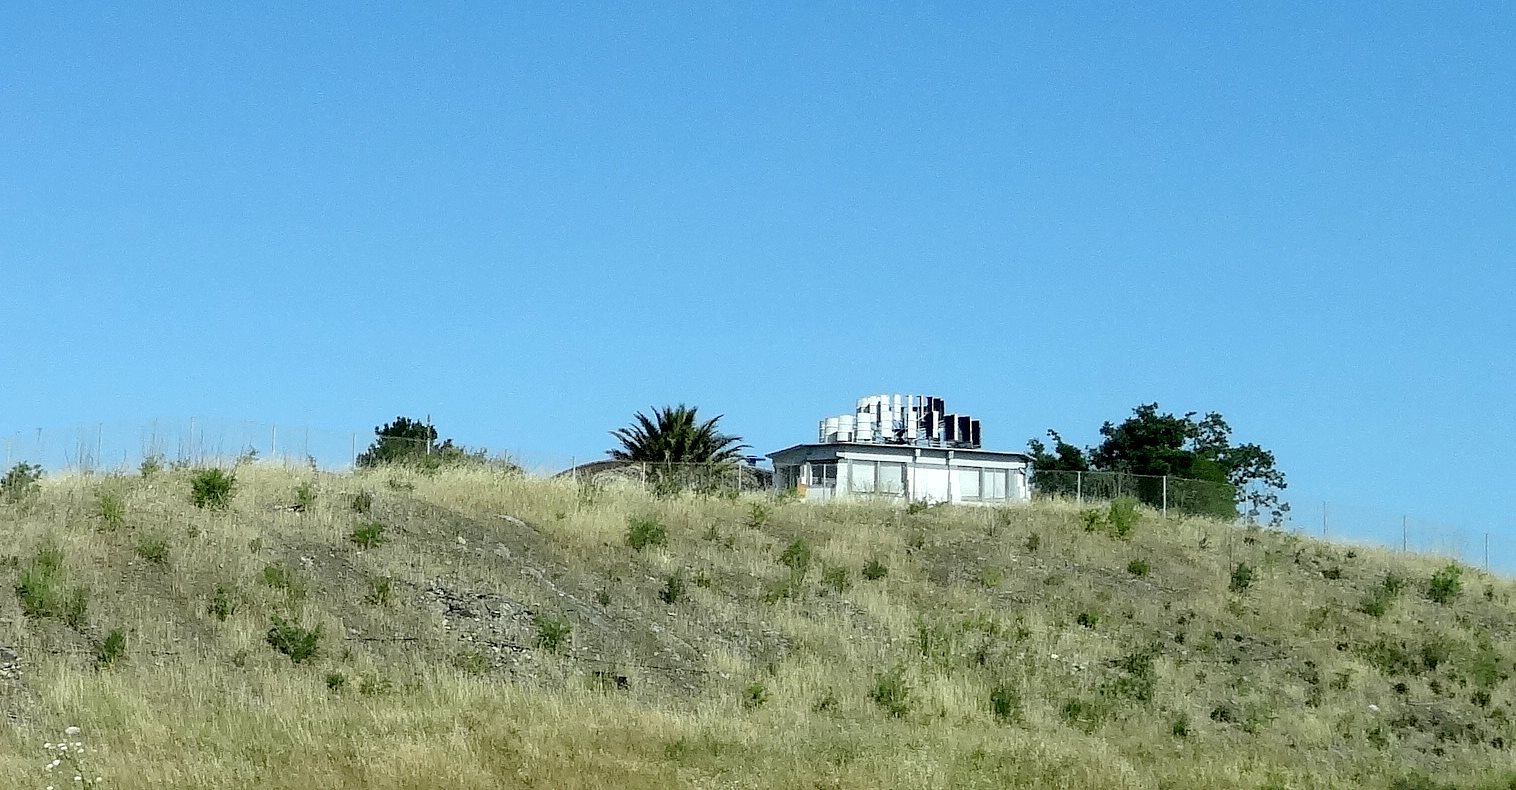 About 12 miles or so north of the Golden Gate is this Windmill atop a building. I always thought it was interesting.